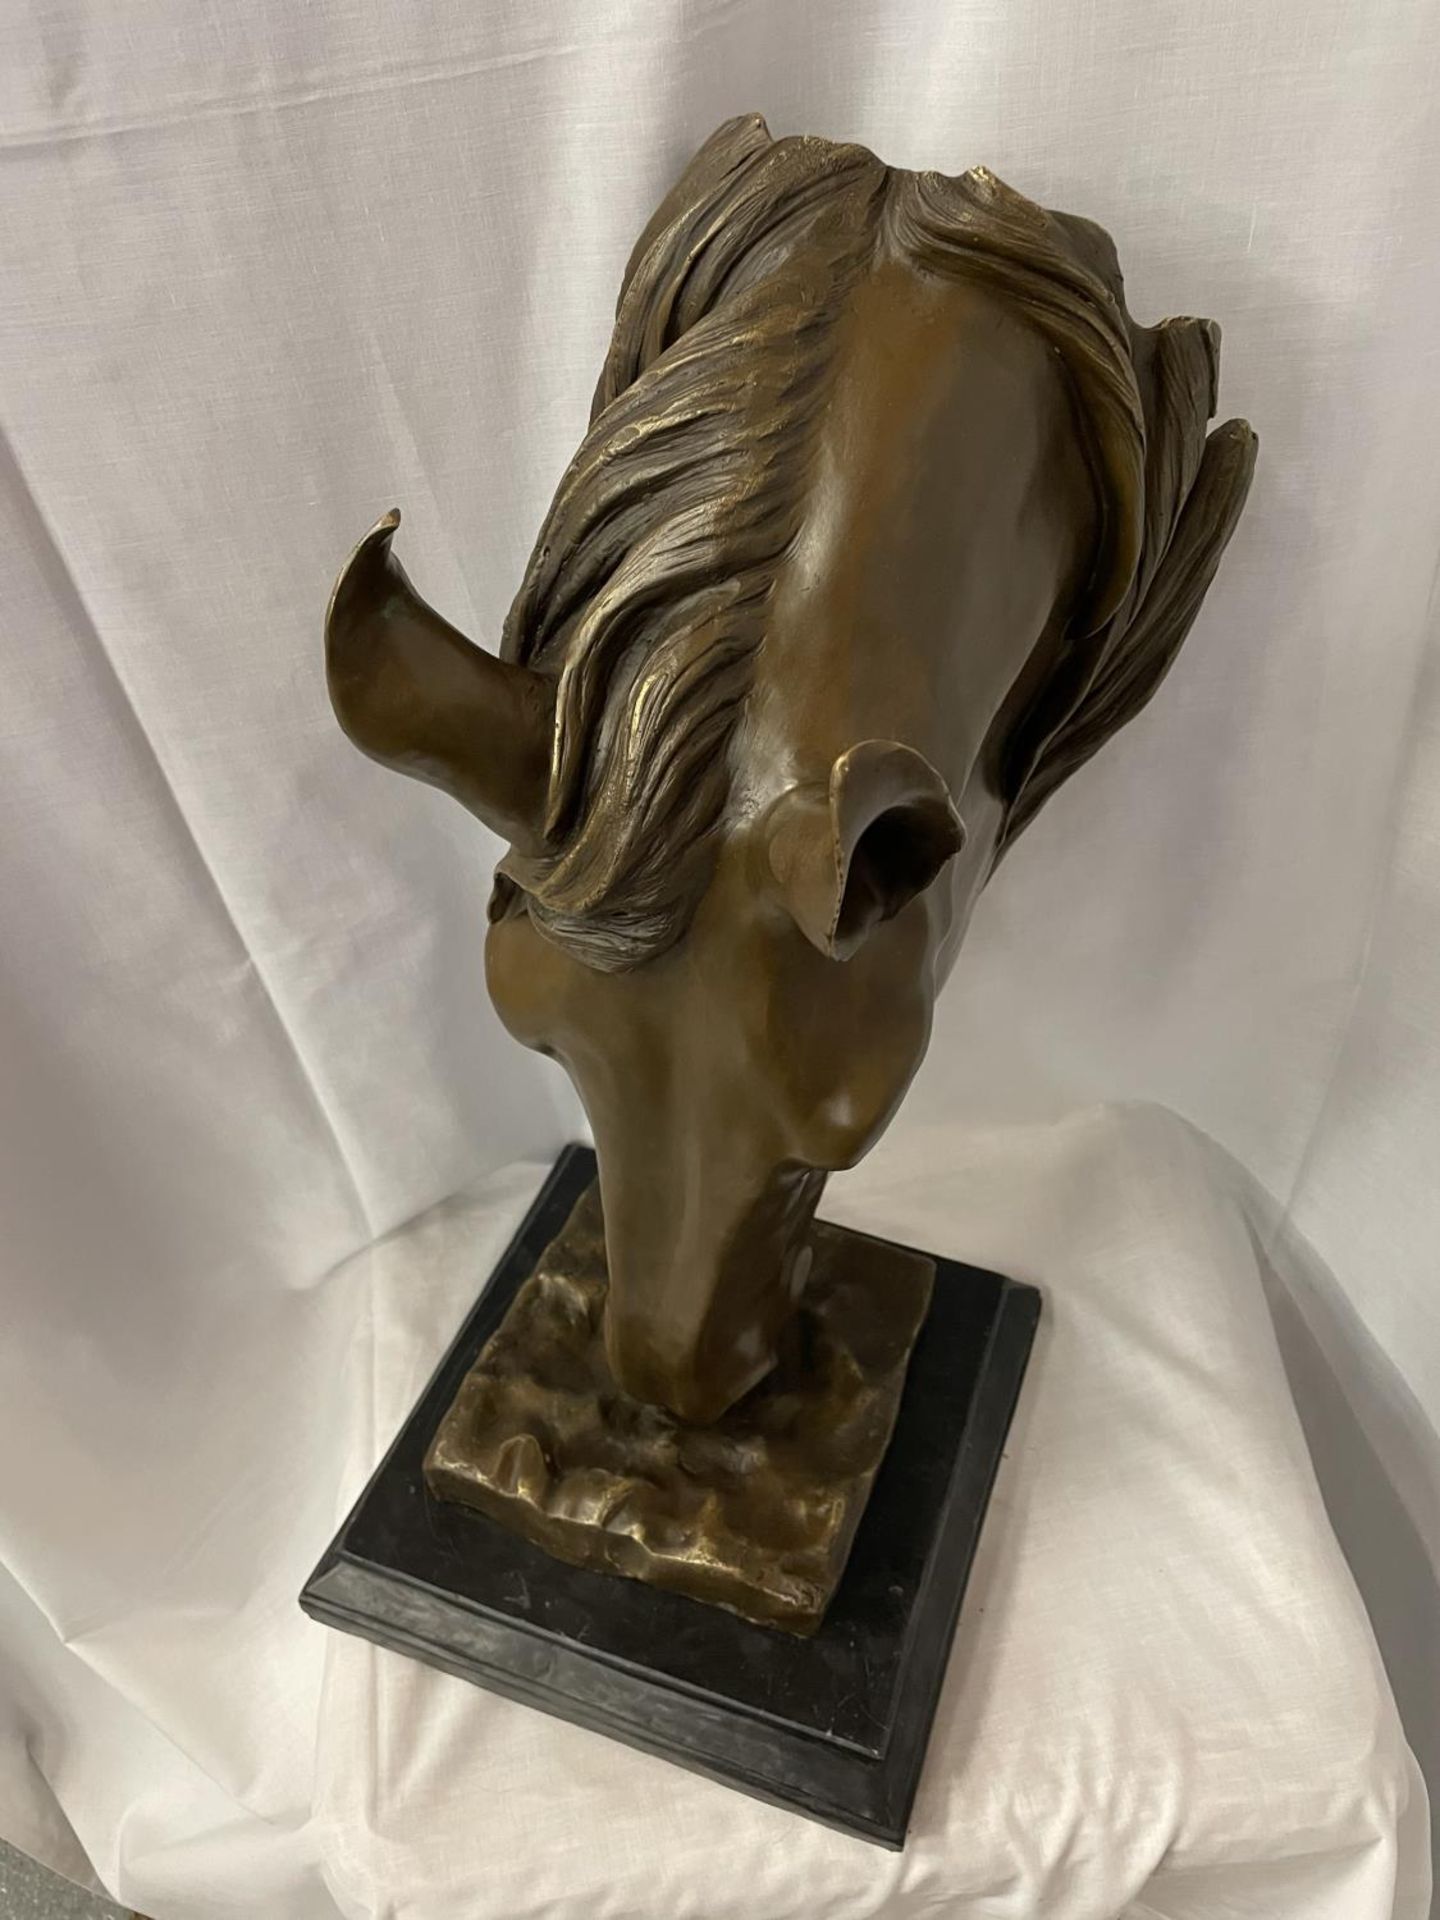 A LARGE BRONZE SCULPTURE OF A HORSE'S HEAD ON A MARBLE BASE 58CM HIGH - Image 3 of 3